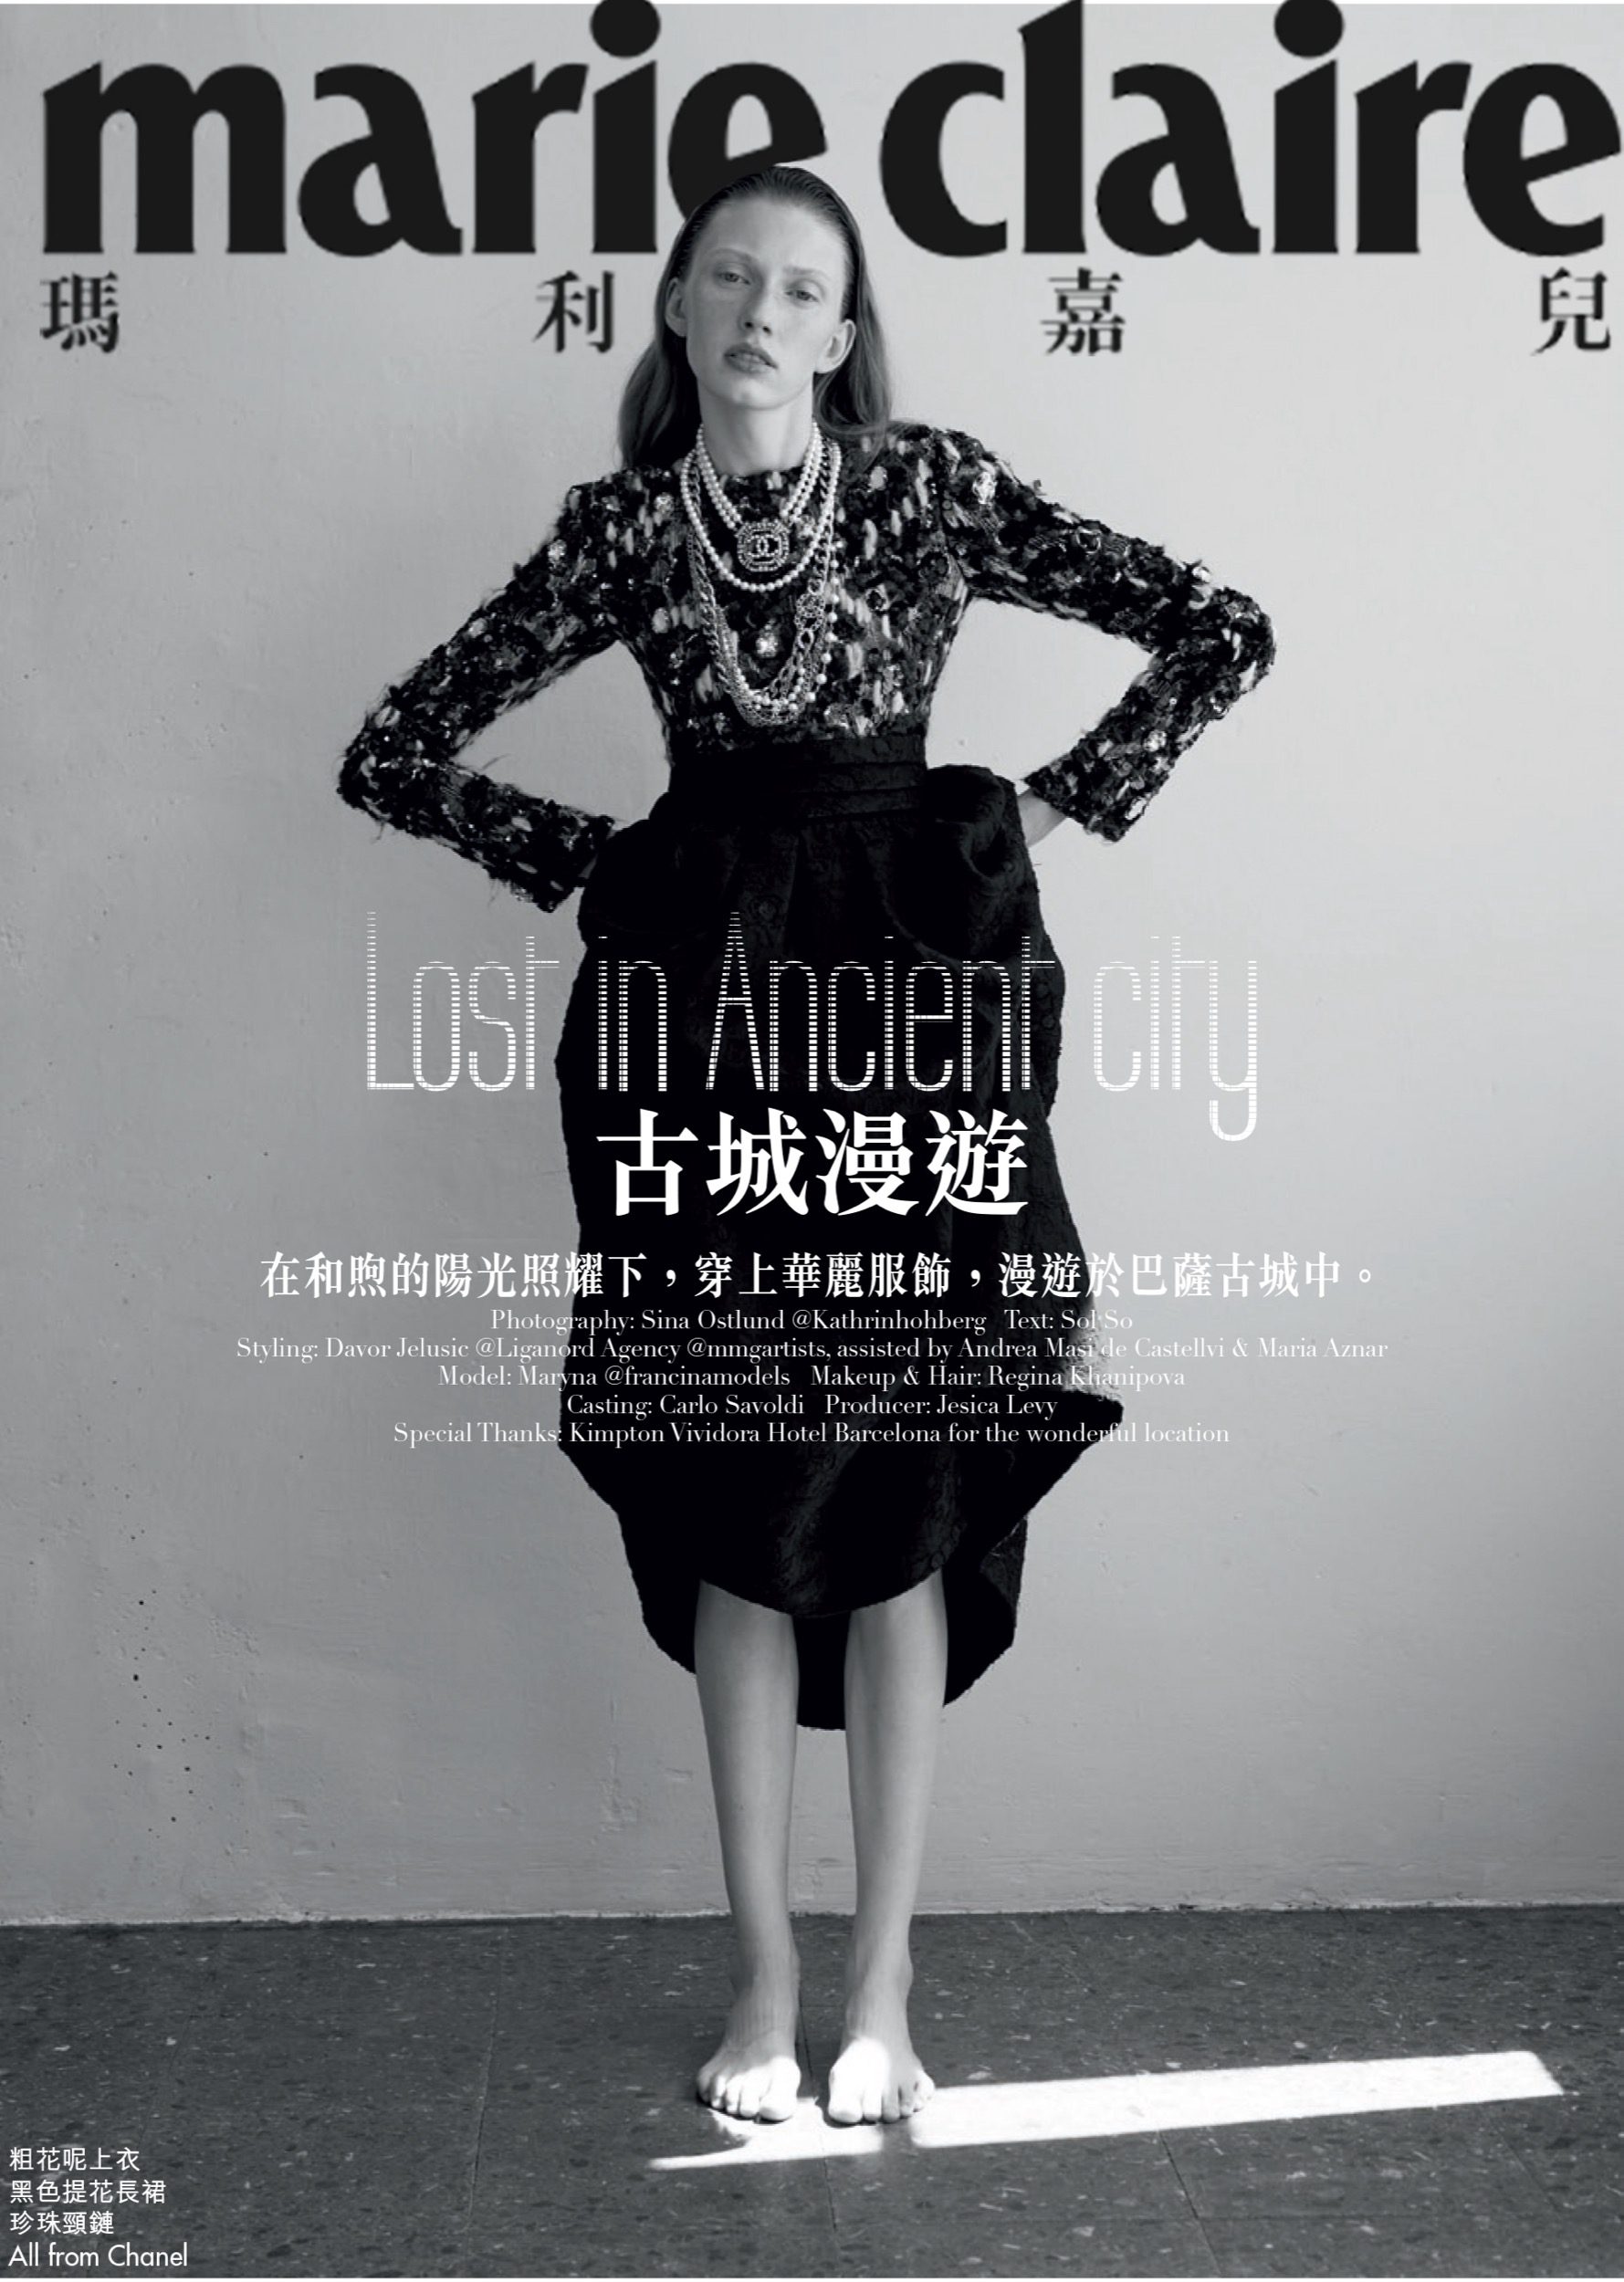 kathrin-hohberg-marie-claire-china-sina-oestlund-15